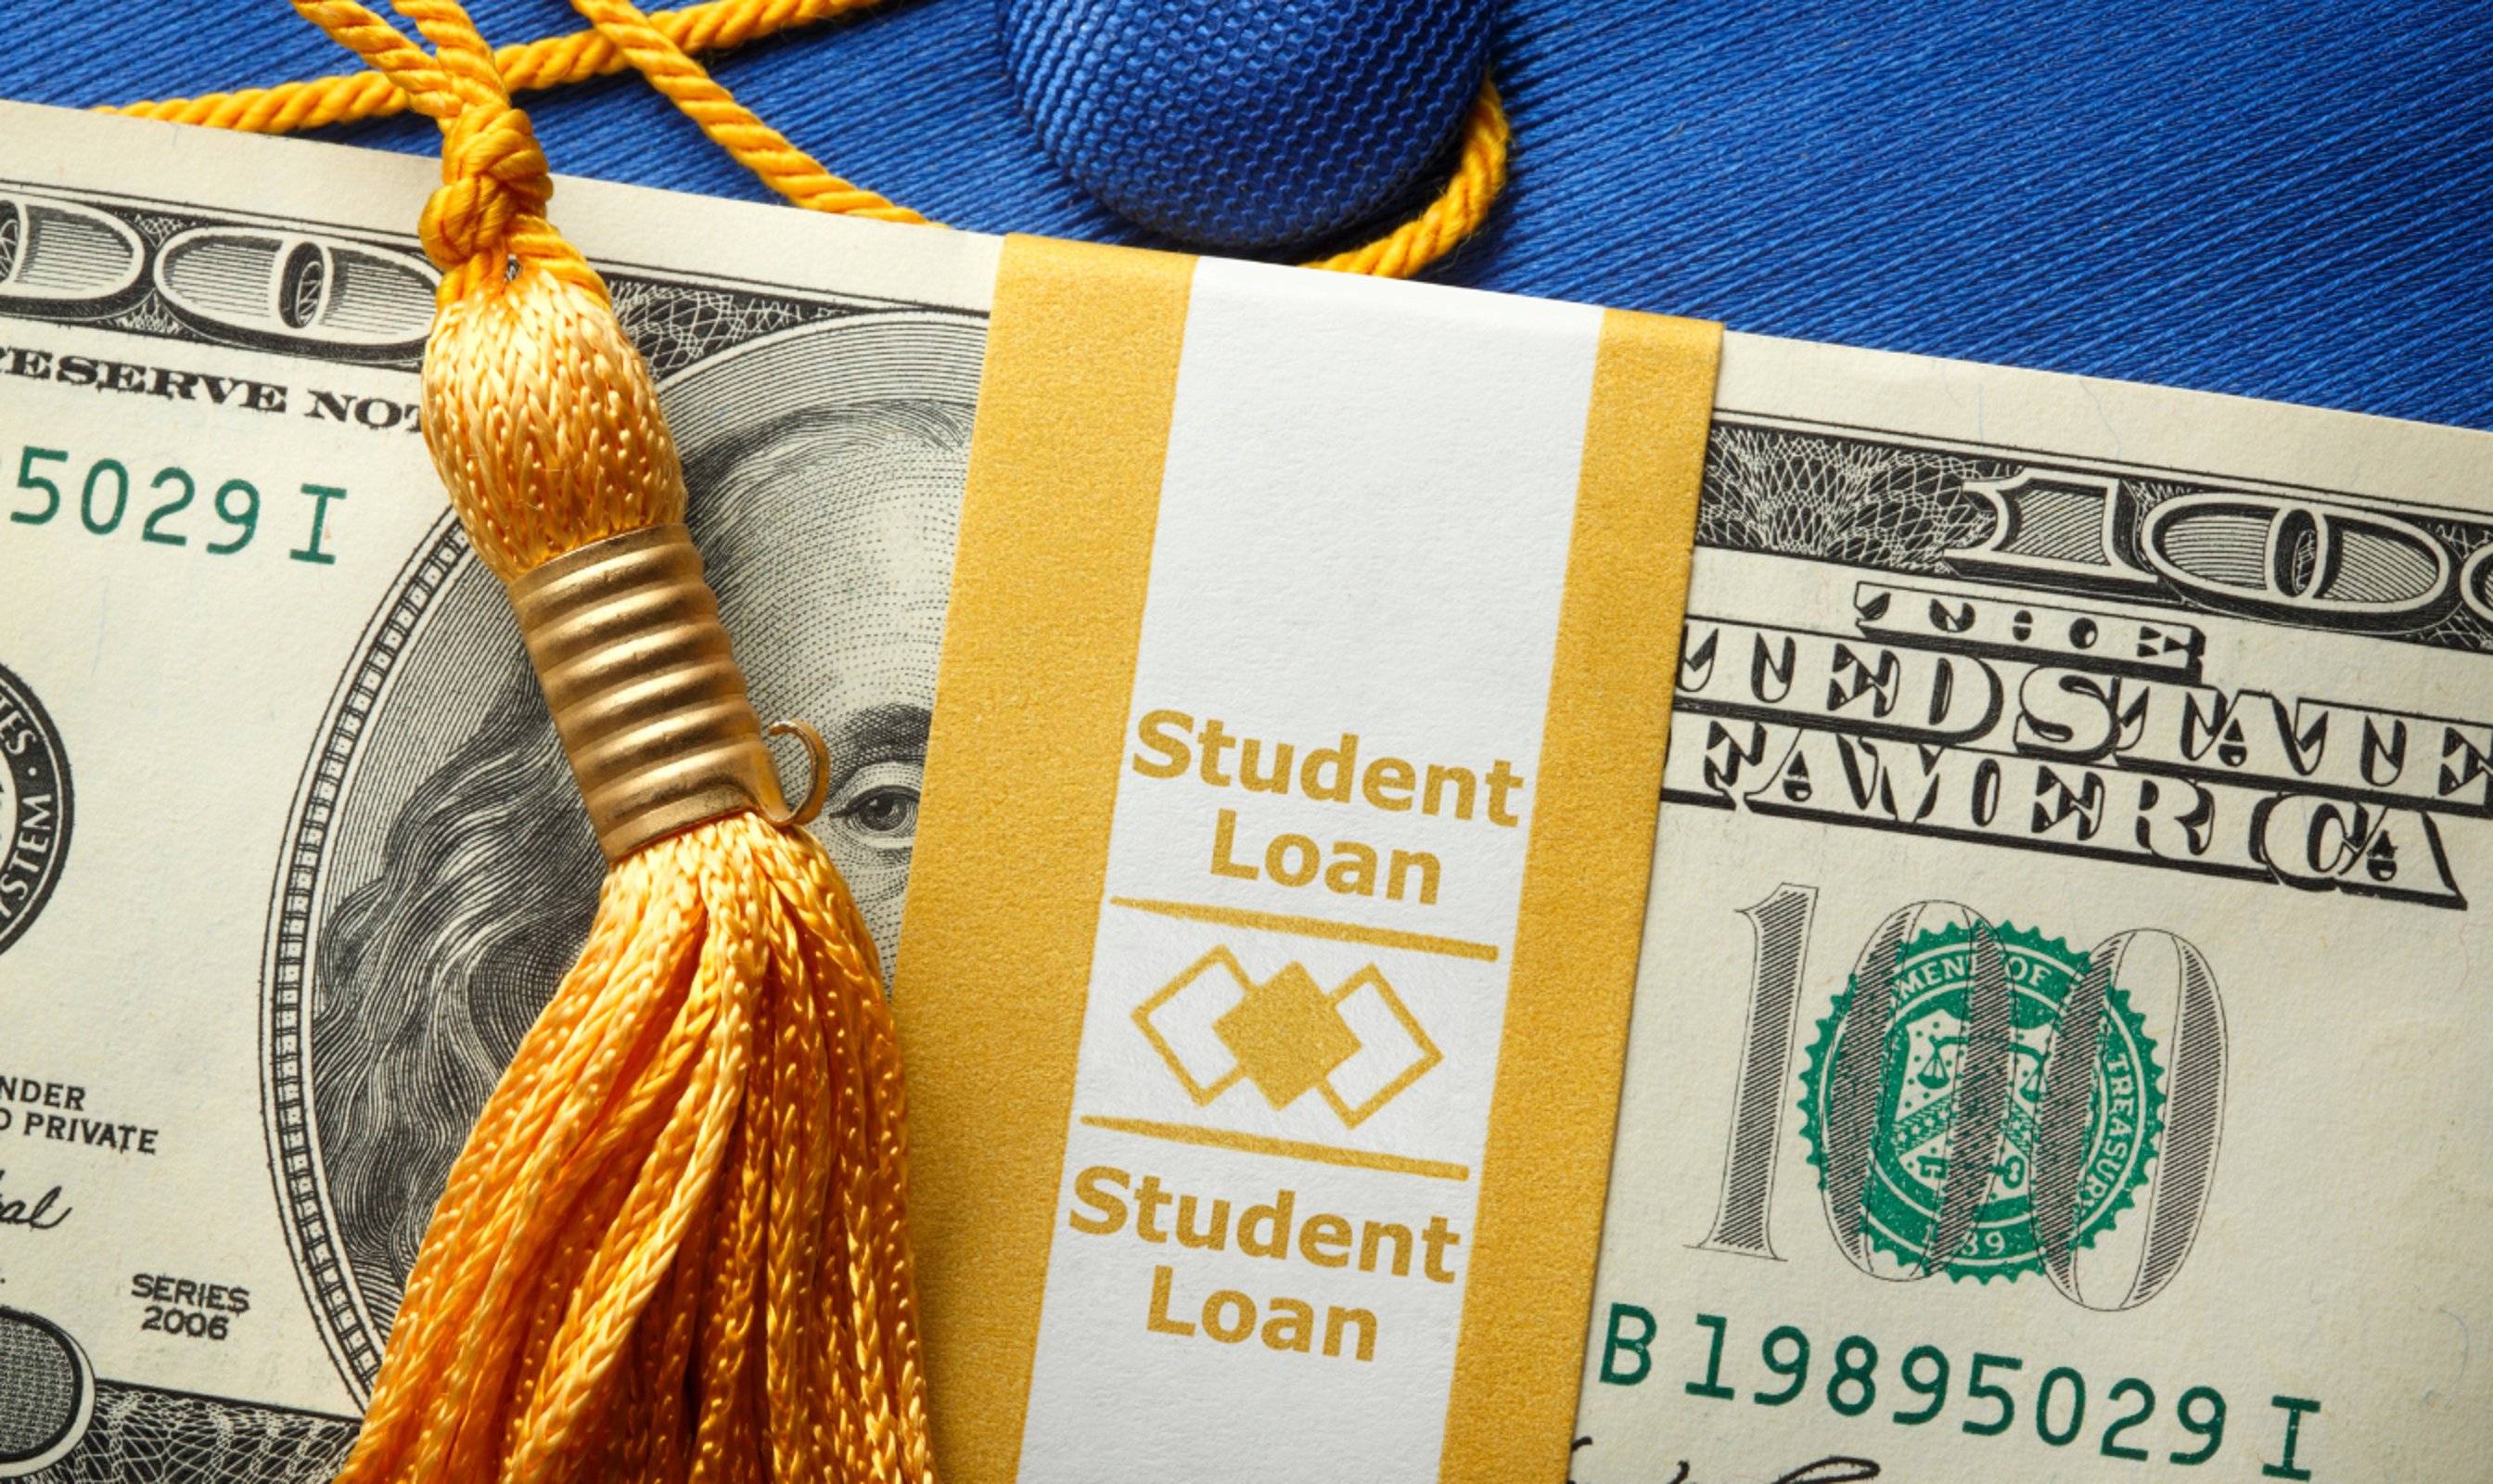 MONEY HACKS: What’s the Update on Student Loan Forgiveness?